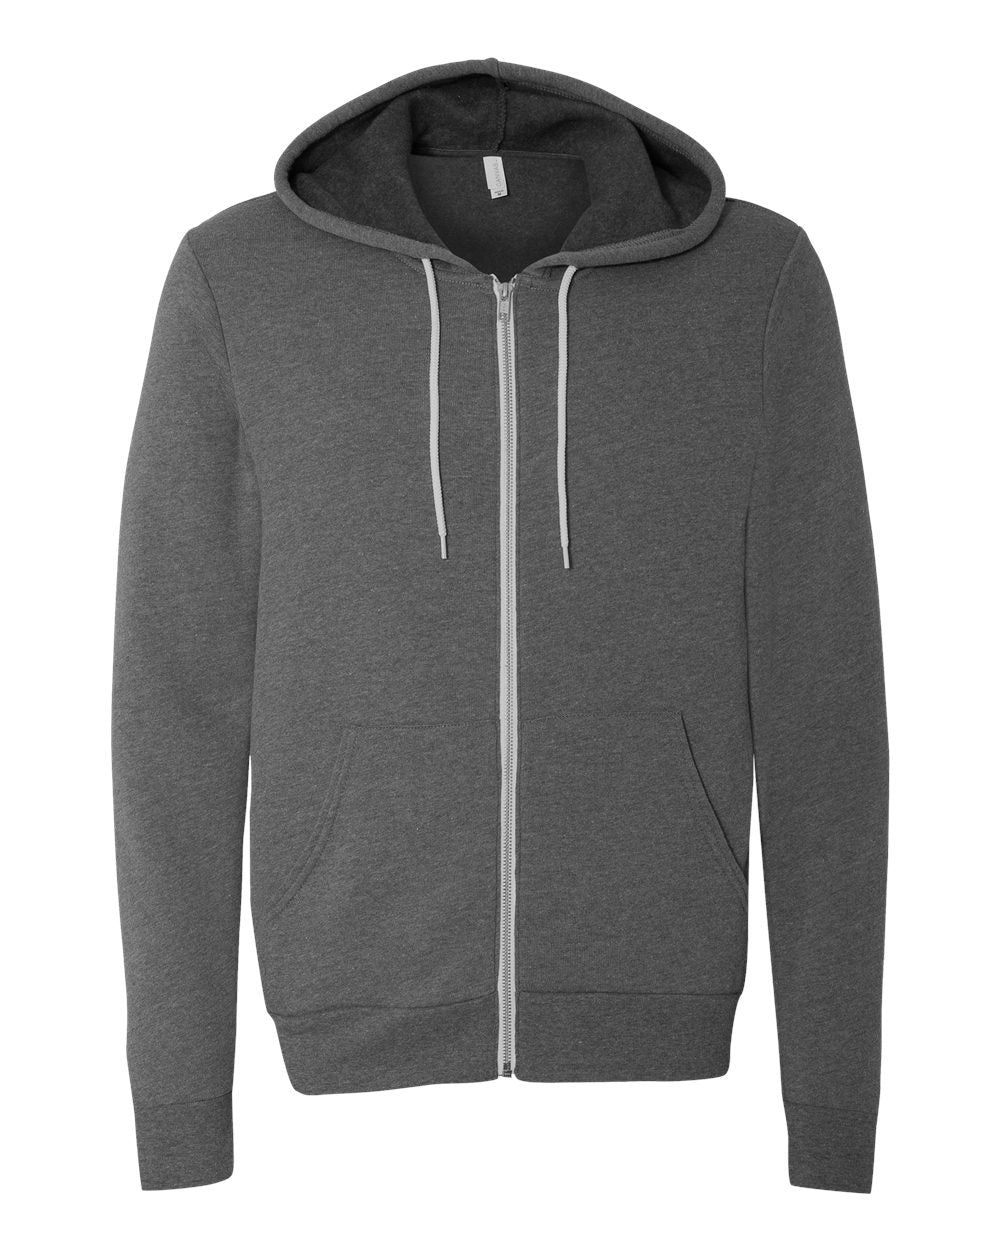 Game Changer Therapy Services Zip Up Hooded Sweatshirt - White Logo